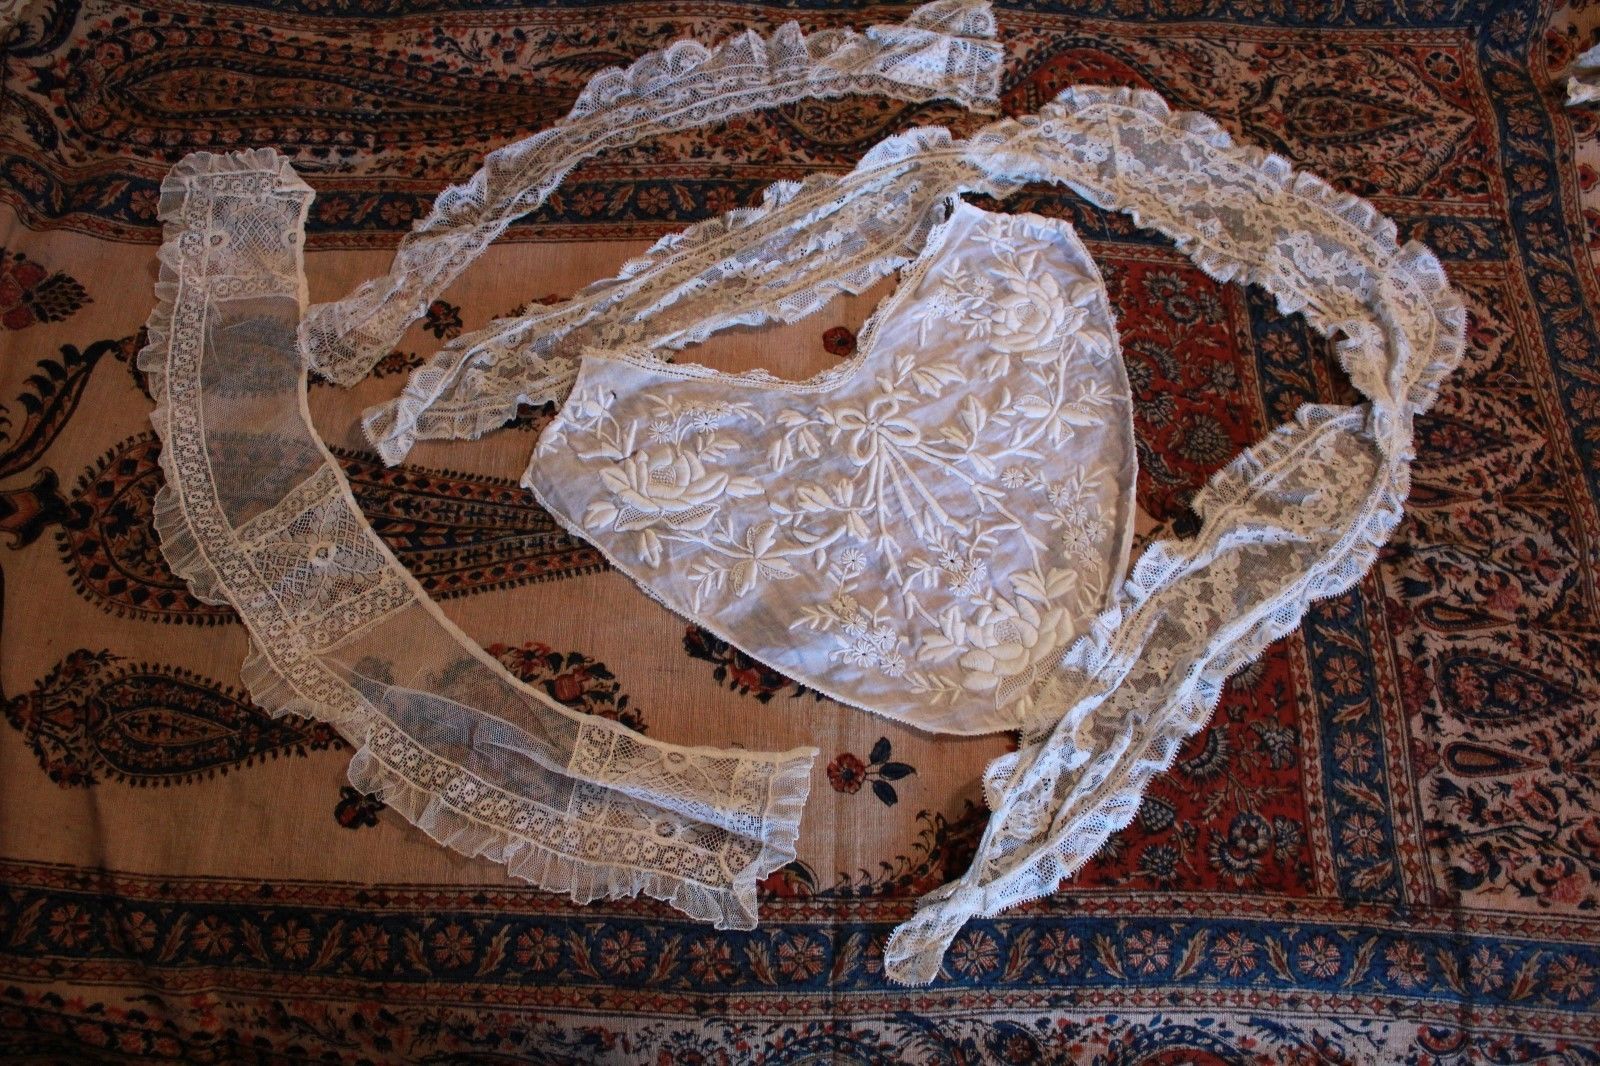 Lot Antique Lace Trim Victorian Clothing Remnants Collars Intricate Embroidery